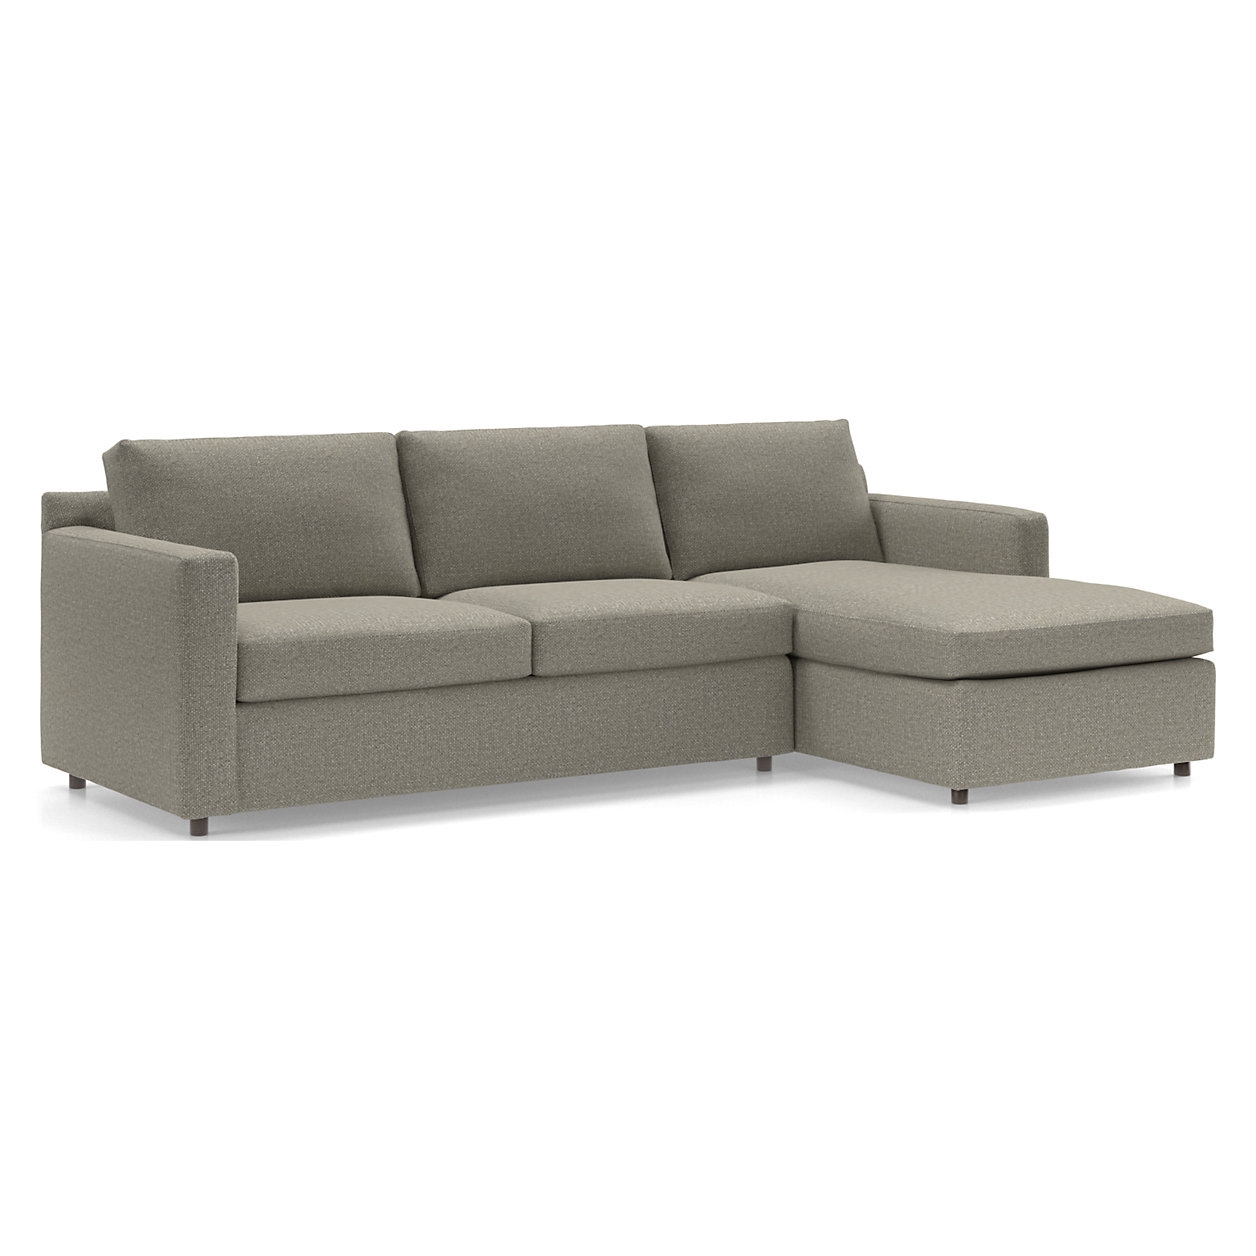 Barrett II 2-Piece Right Arm Chaise Sectional - - Image 1